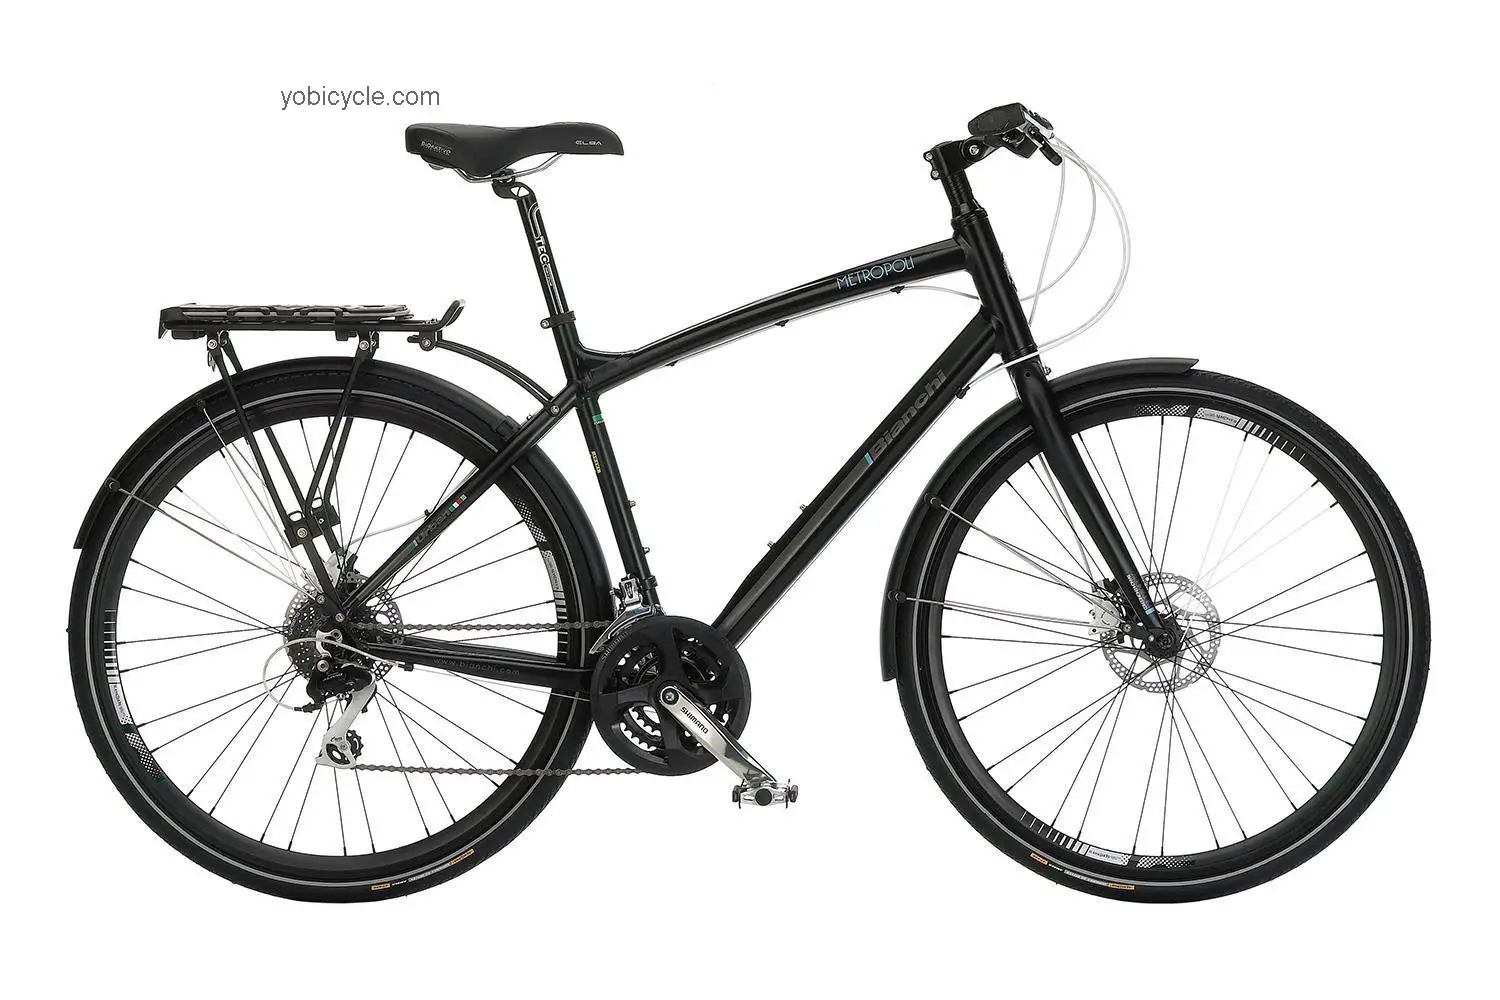 Bianchi Metropoli Due competitors and comparison tool online specs and performance